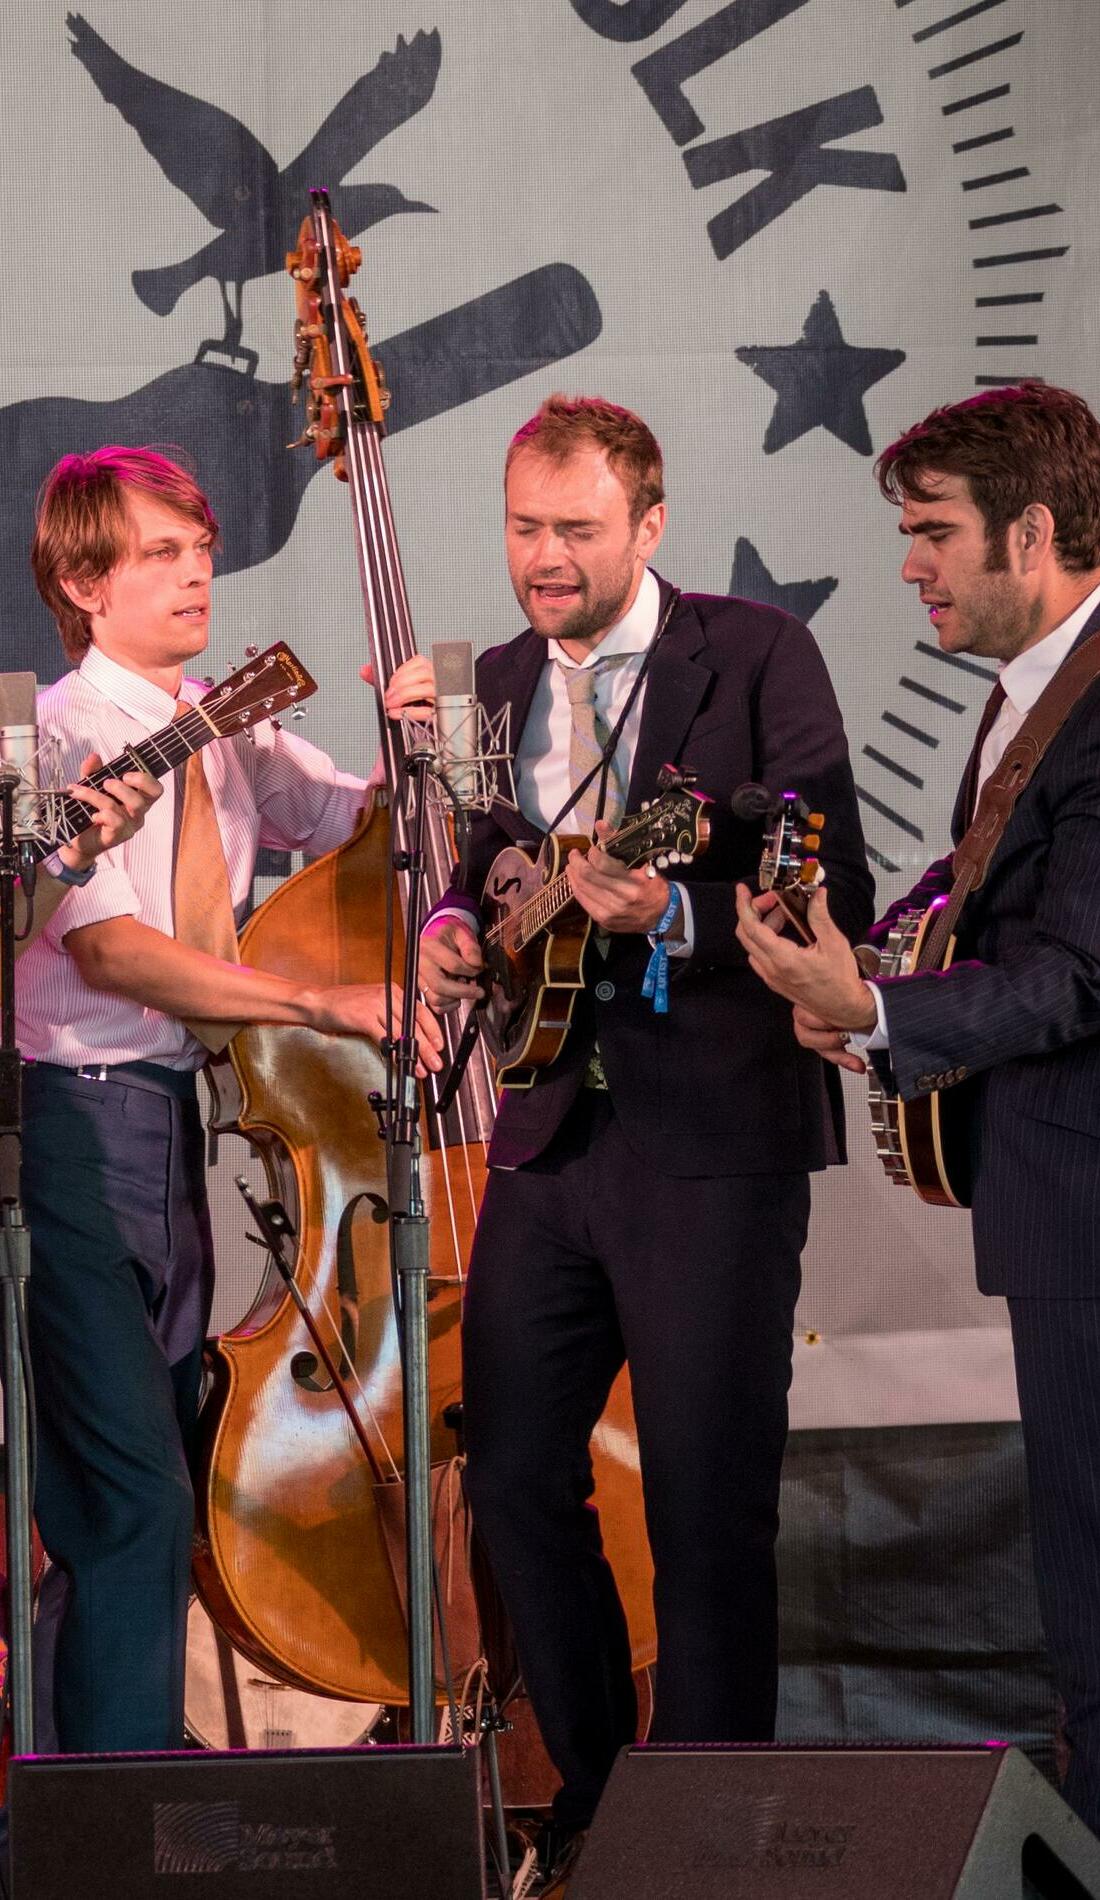 A Punch Brothers live event